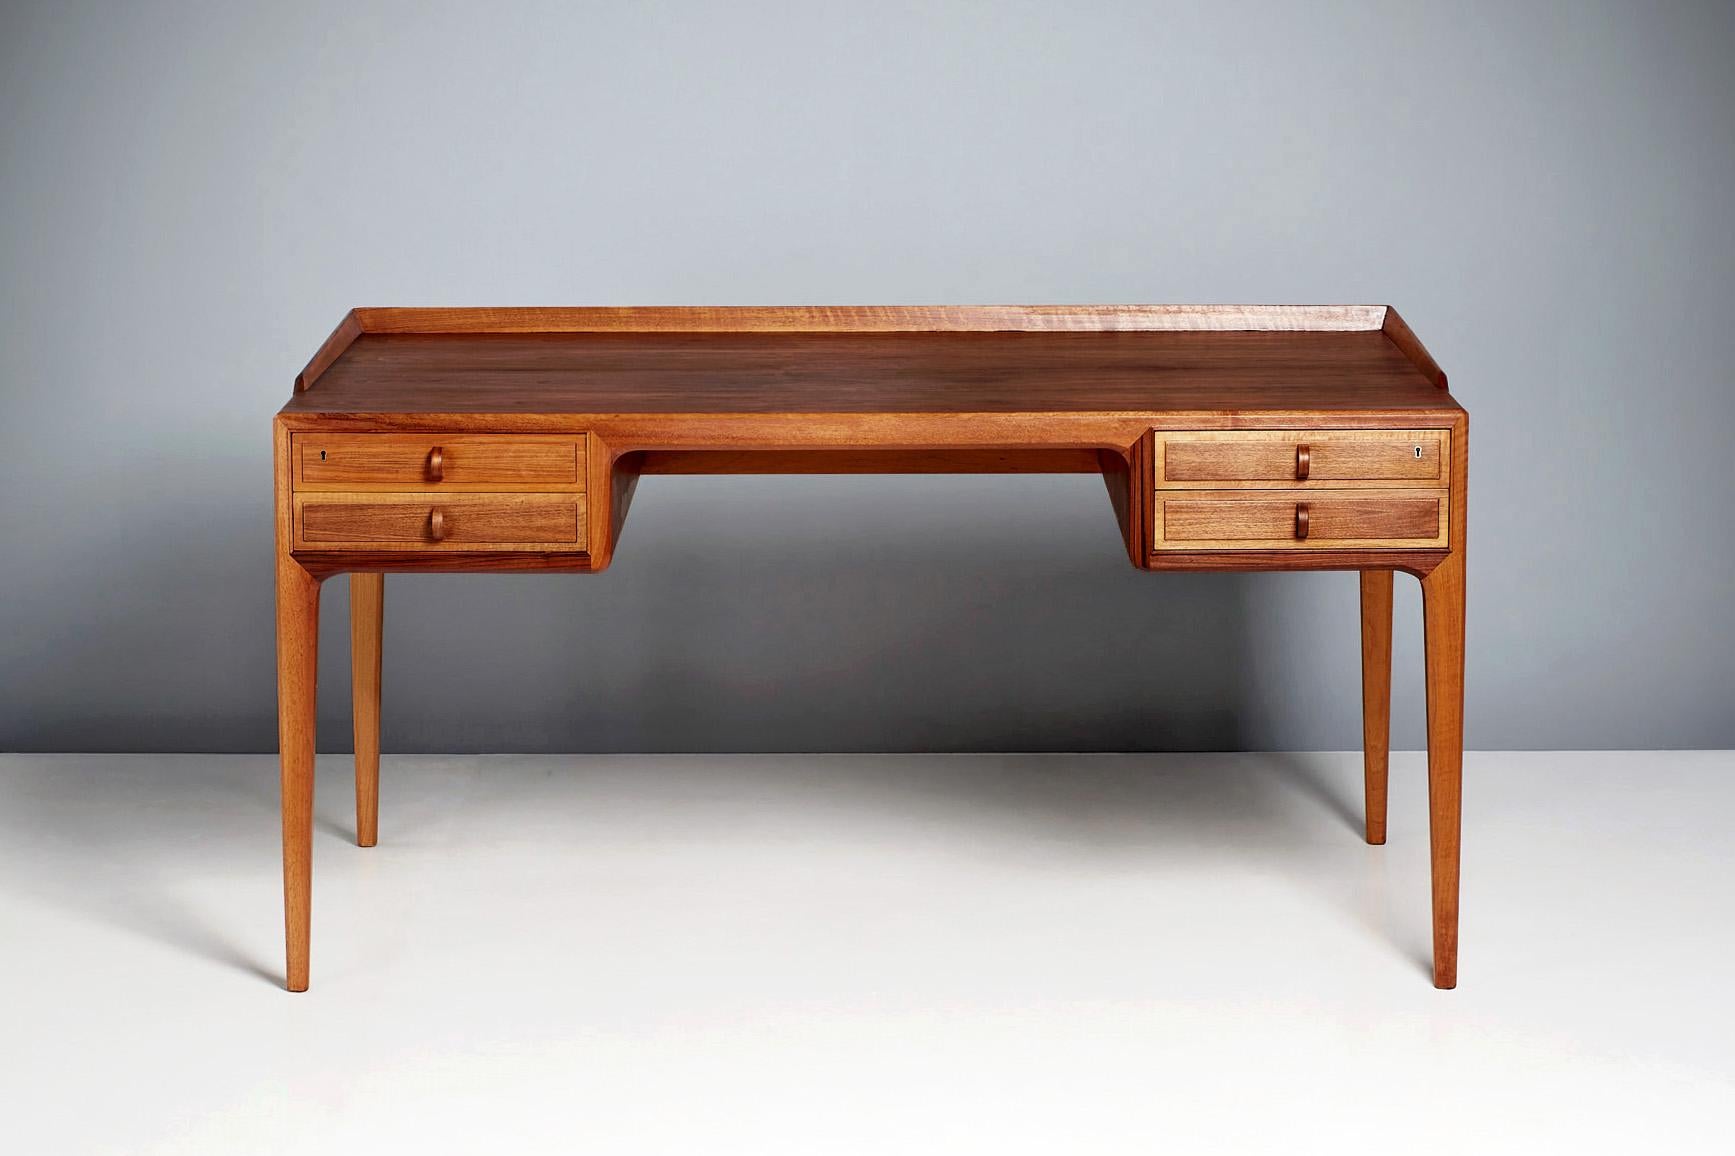 Bertil Fridhagen Writing desk produced by Swedish cabinetmakers Bodafors in 1962.

This compact desk features elegant tapered and chamfered legs, a ridge around the sides and back of the desk and has 2 sets of drawers either side of the central